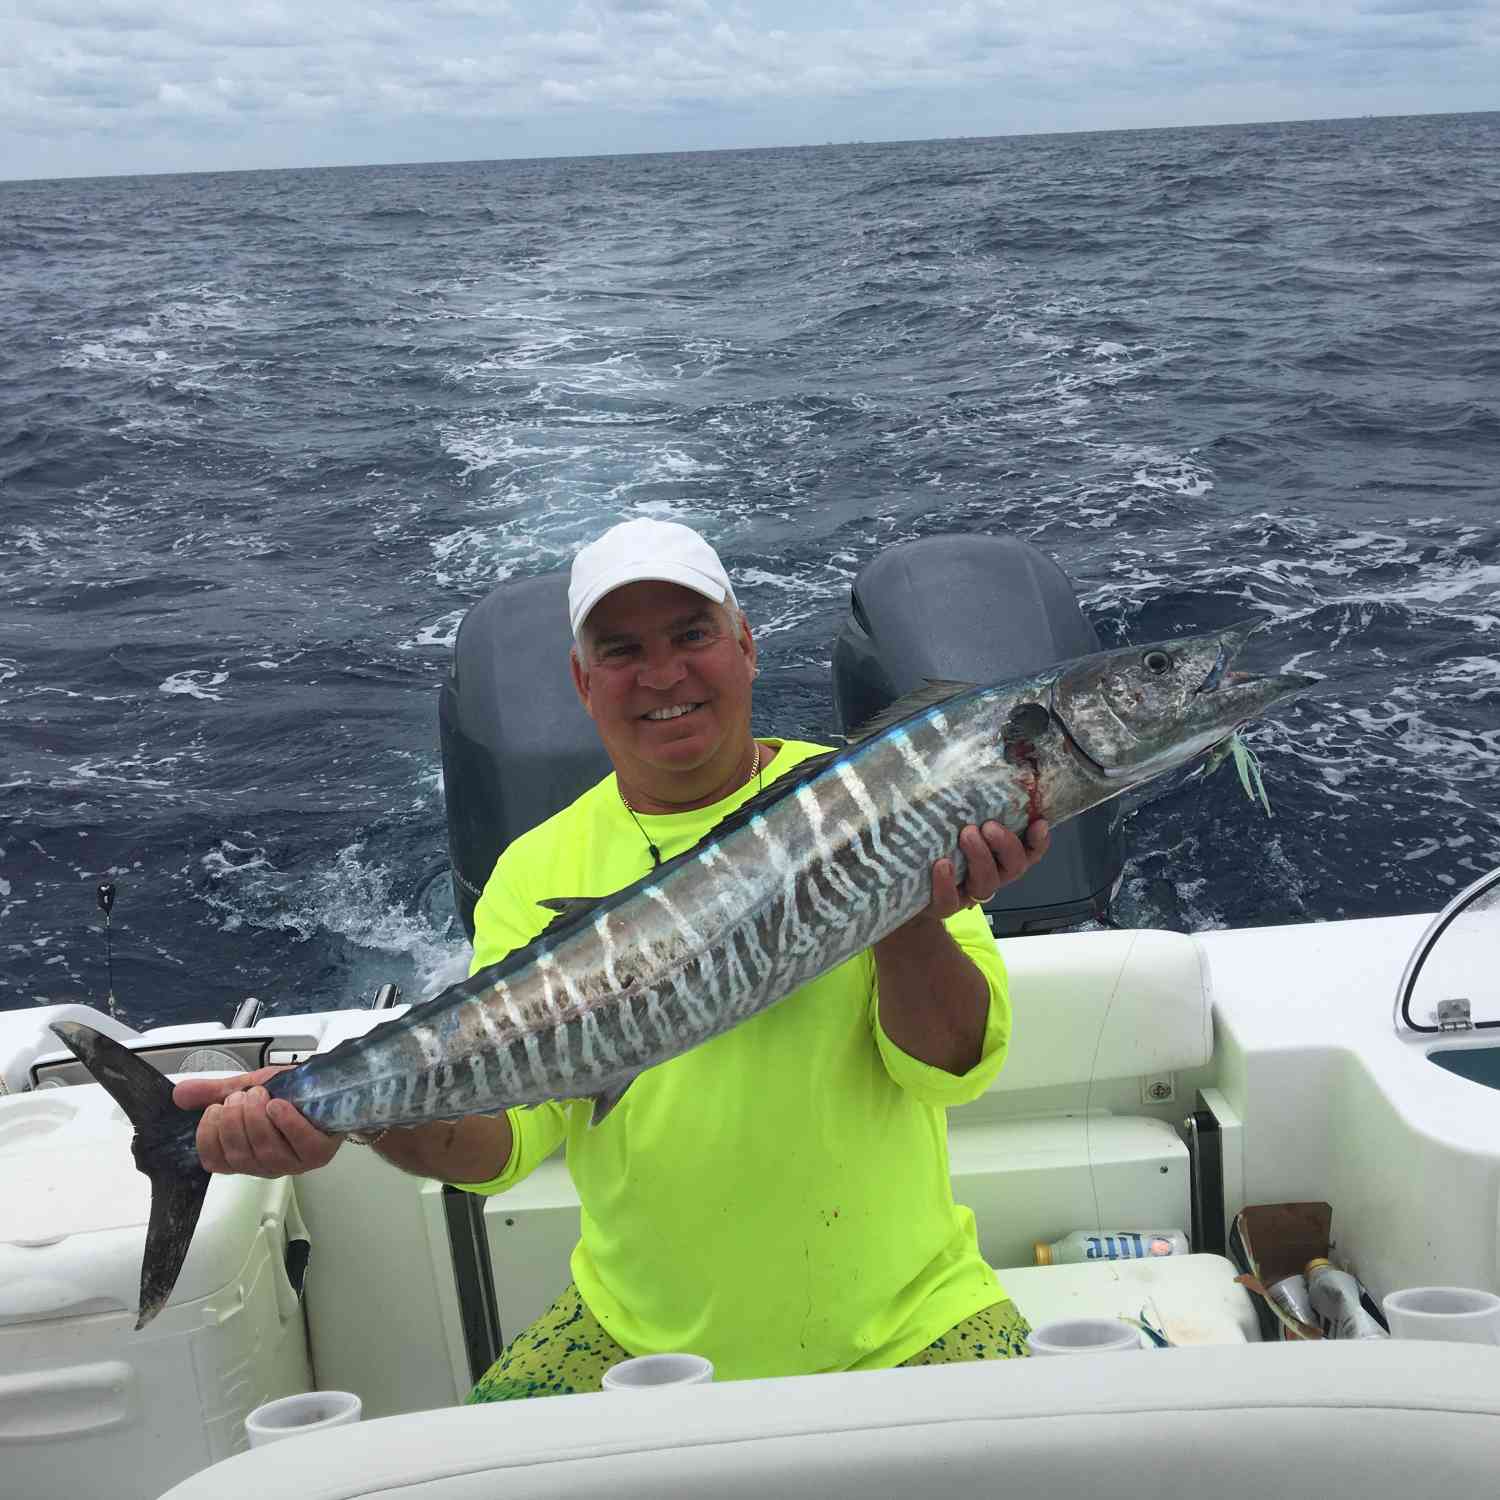 May 12th 2018. First wahoo taken in my new 2018 Sportsman Open 252. Small chain rigged ballyhoo tipped with a...